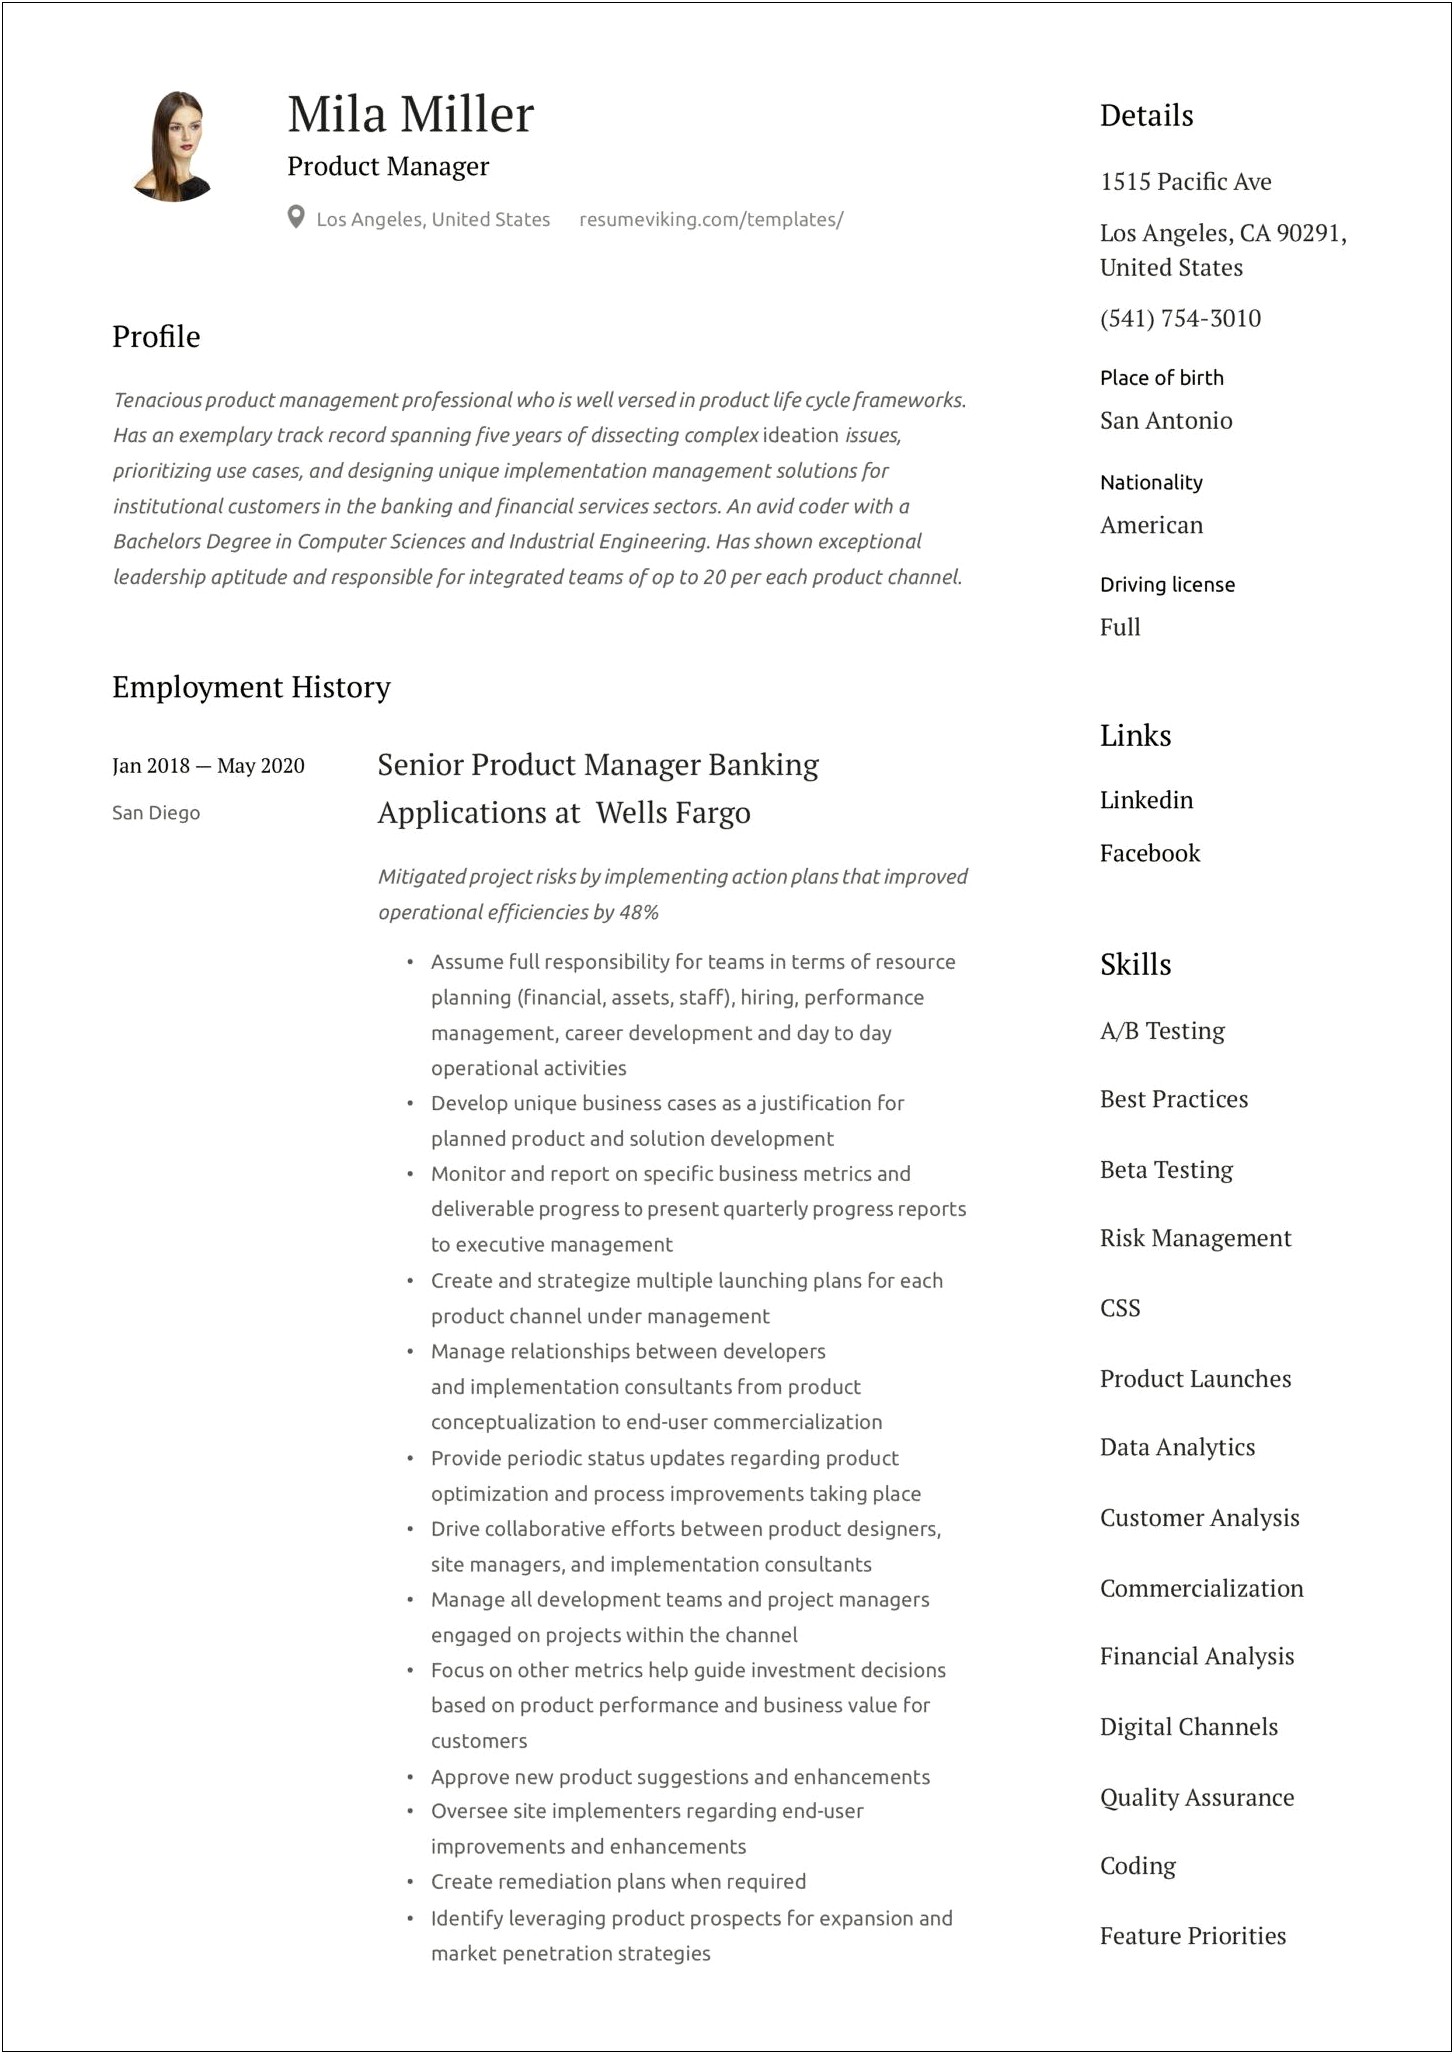 Resume Format For Product Management